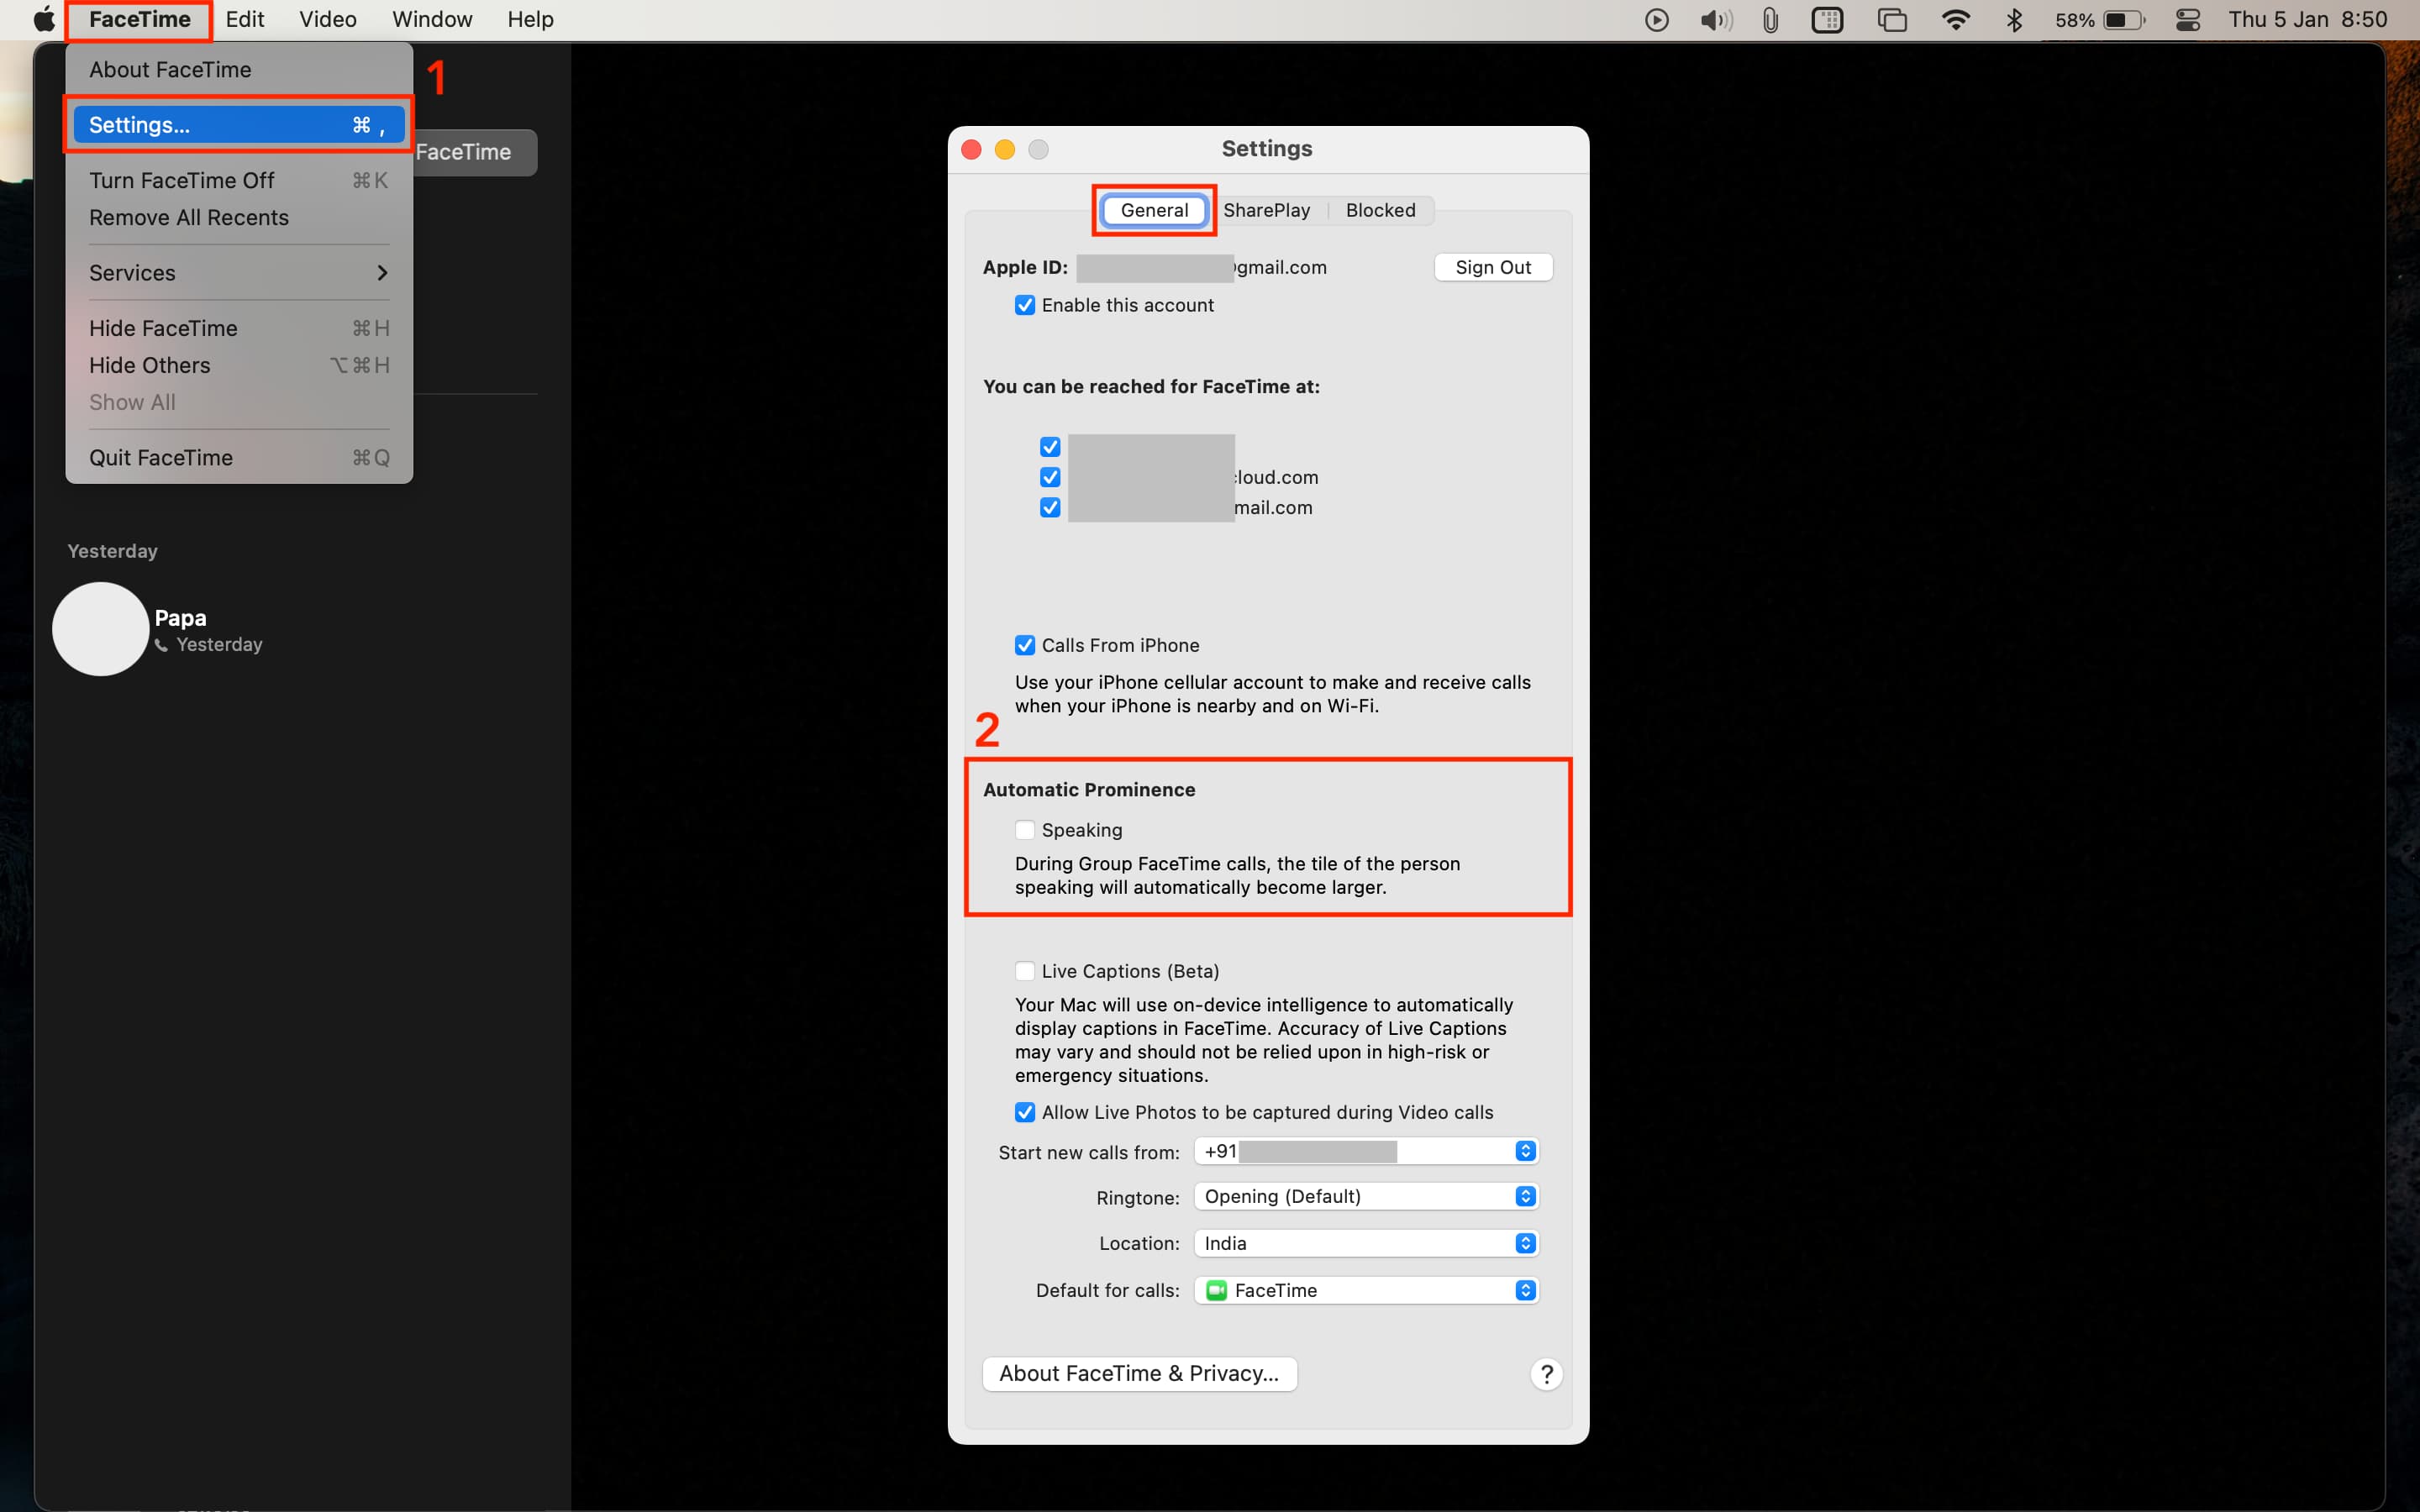 Disable Automatic Prominence in FaceTime on Mac